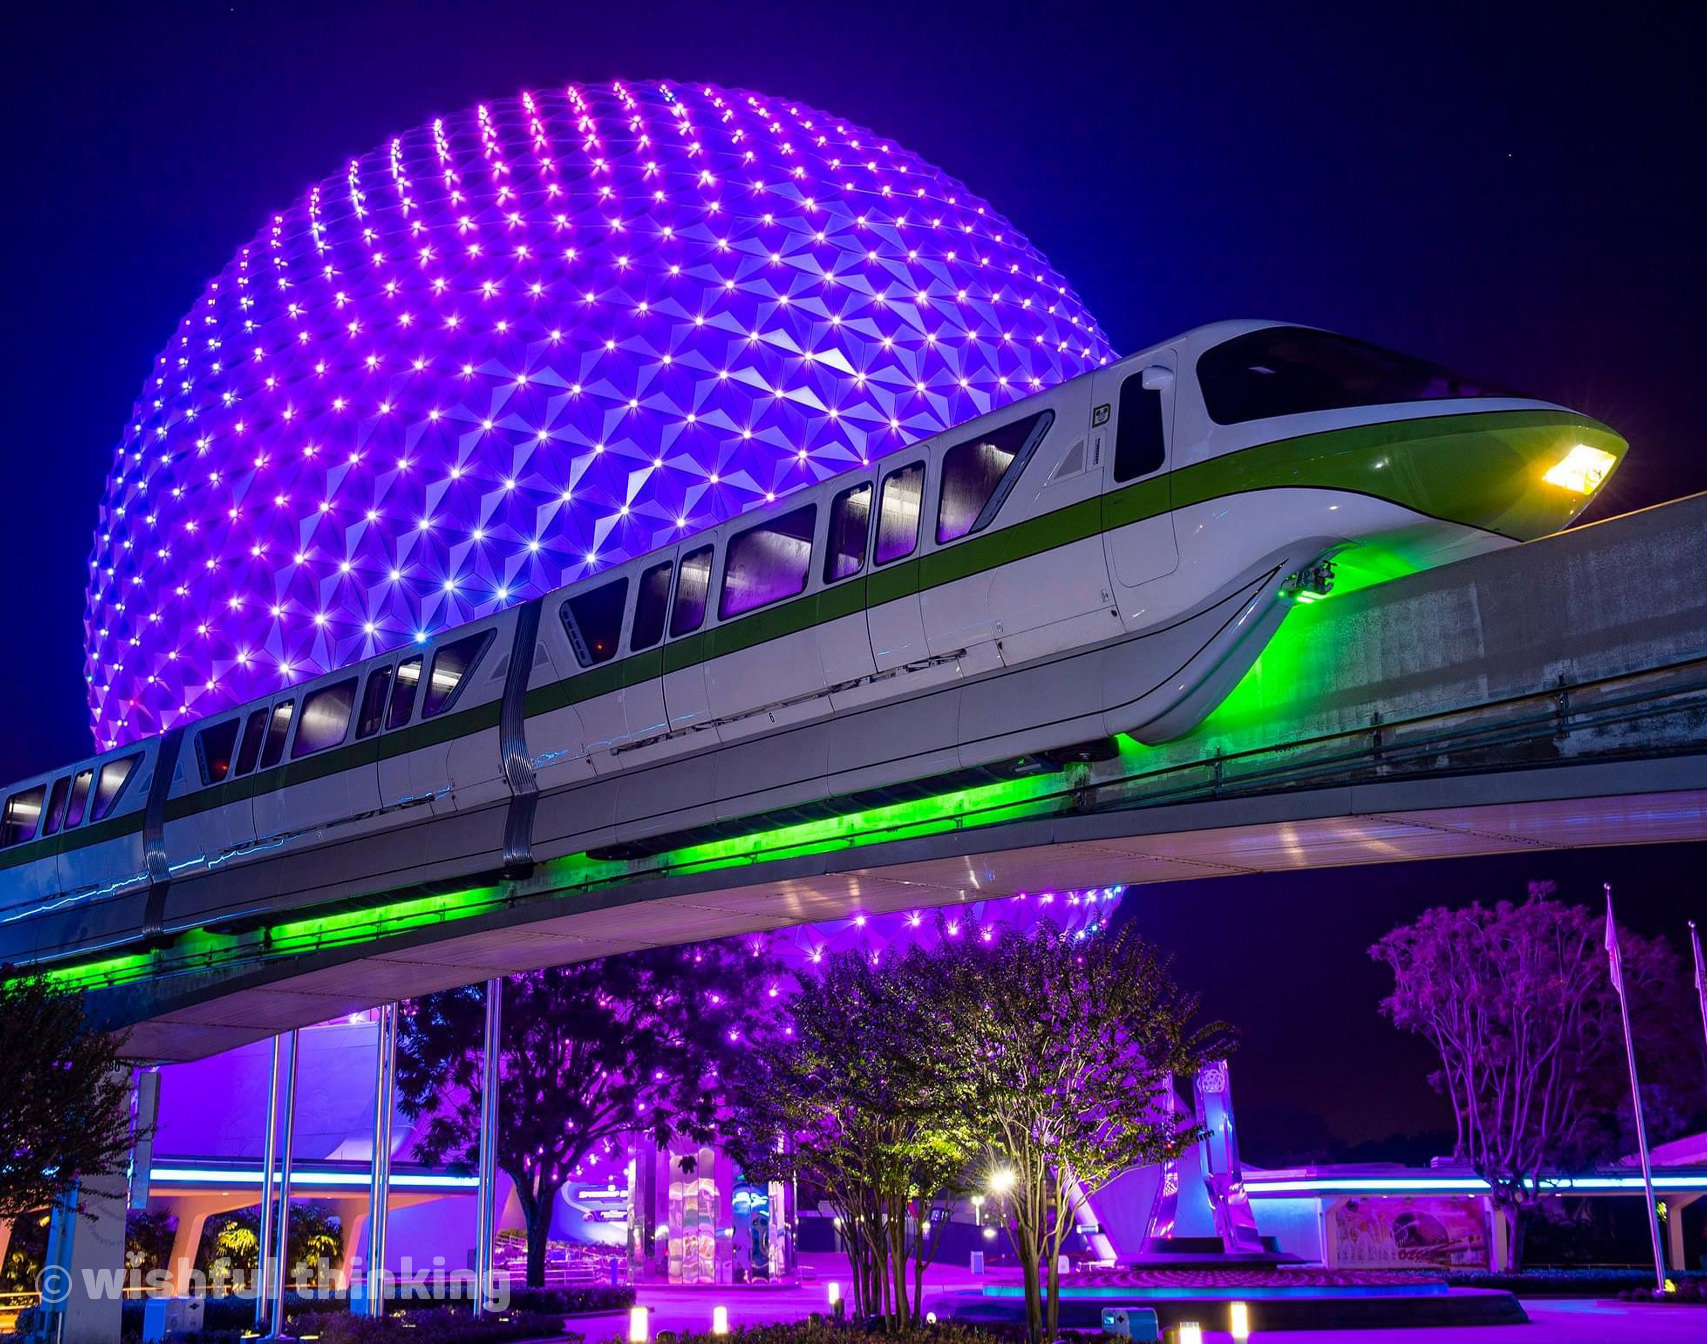 EPCOT's monorail glides in front of an illuminated Spaceship Earth during the 50th Anniversary celebration at Walt Disney World in Orlando, Florida